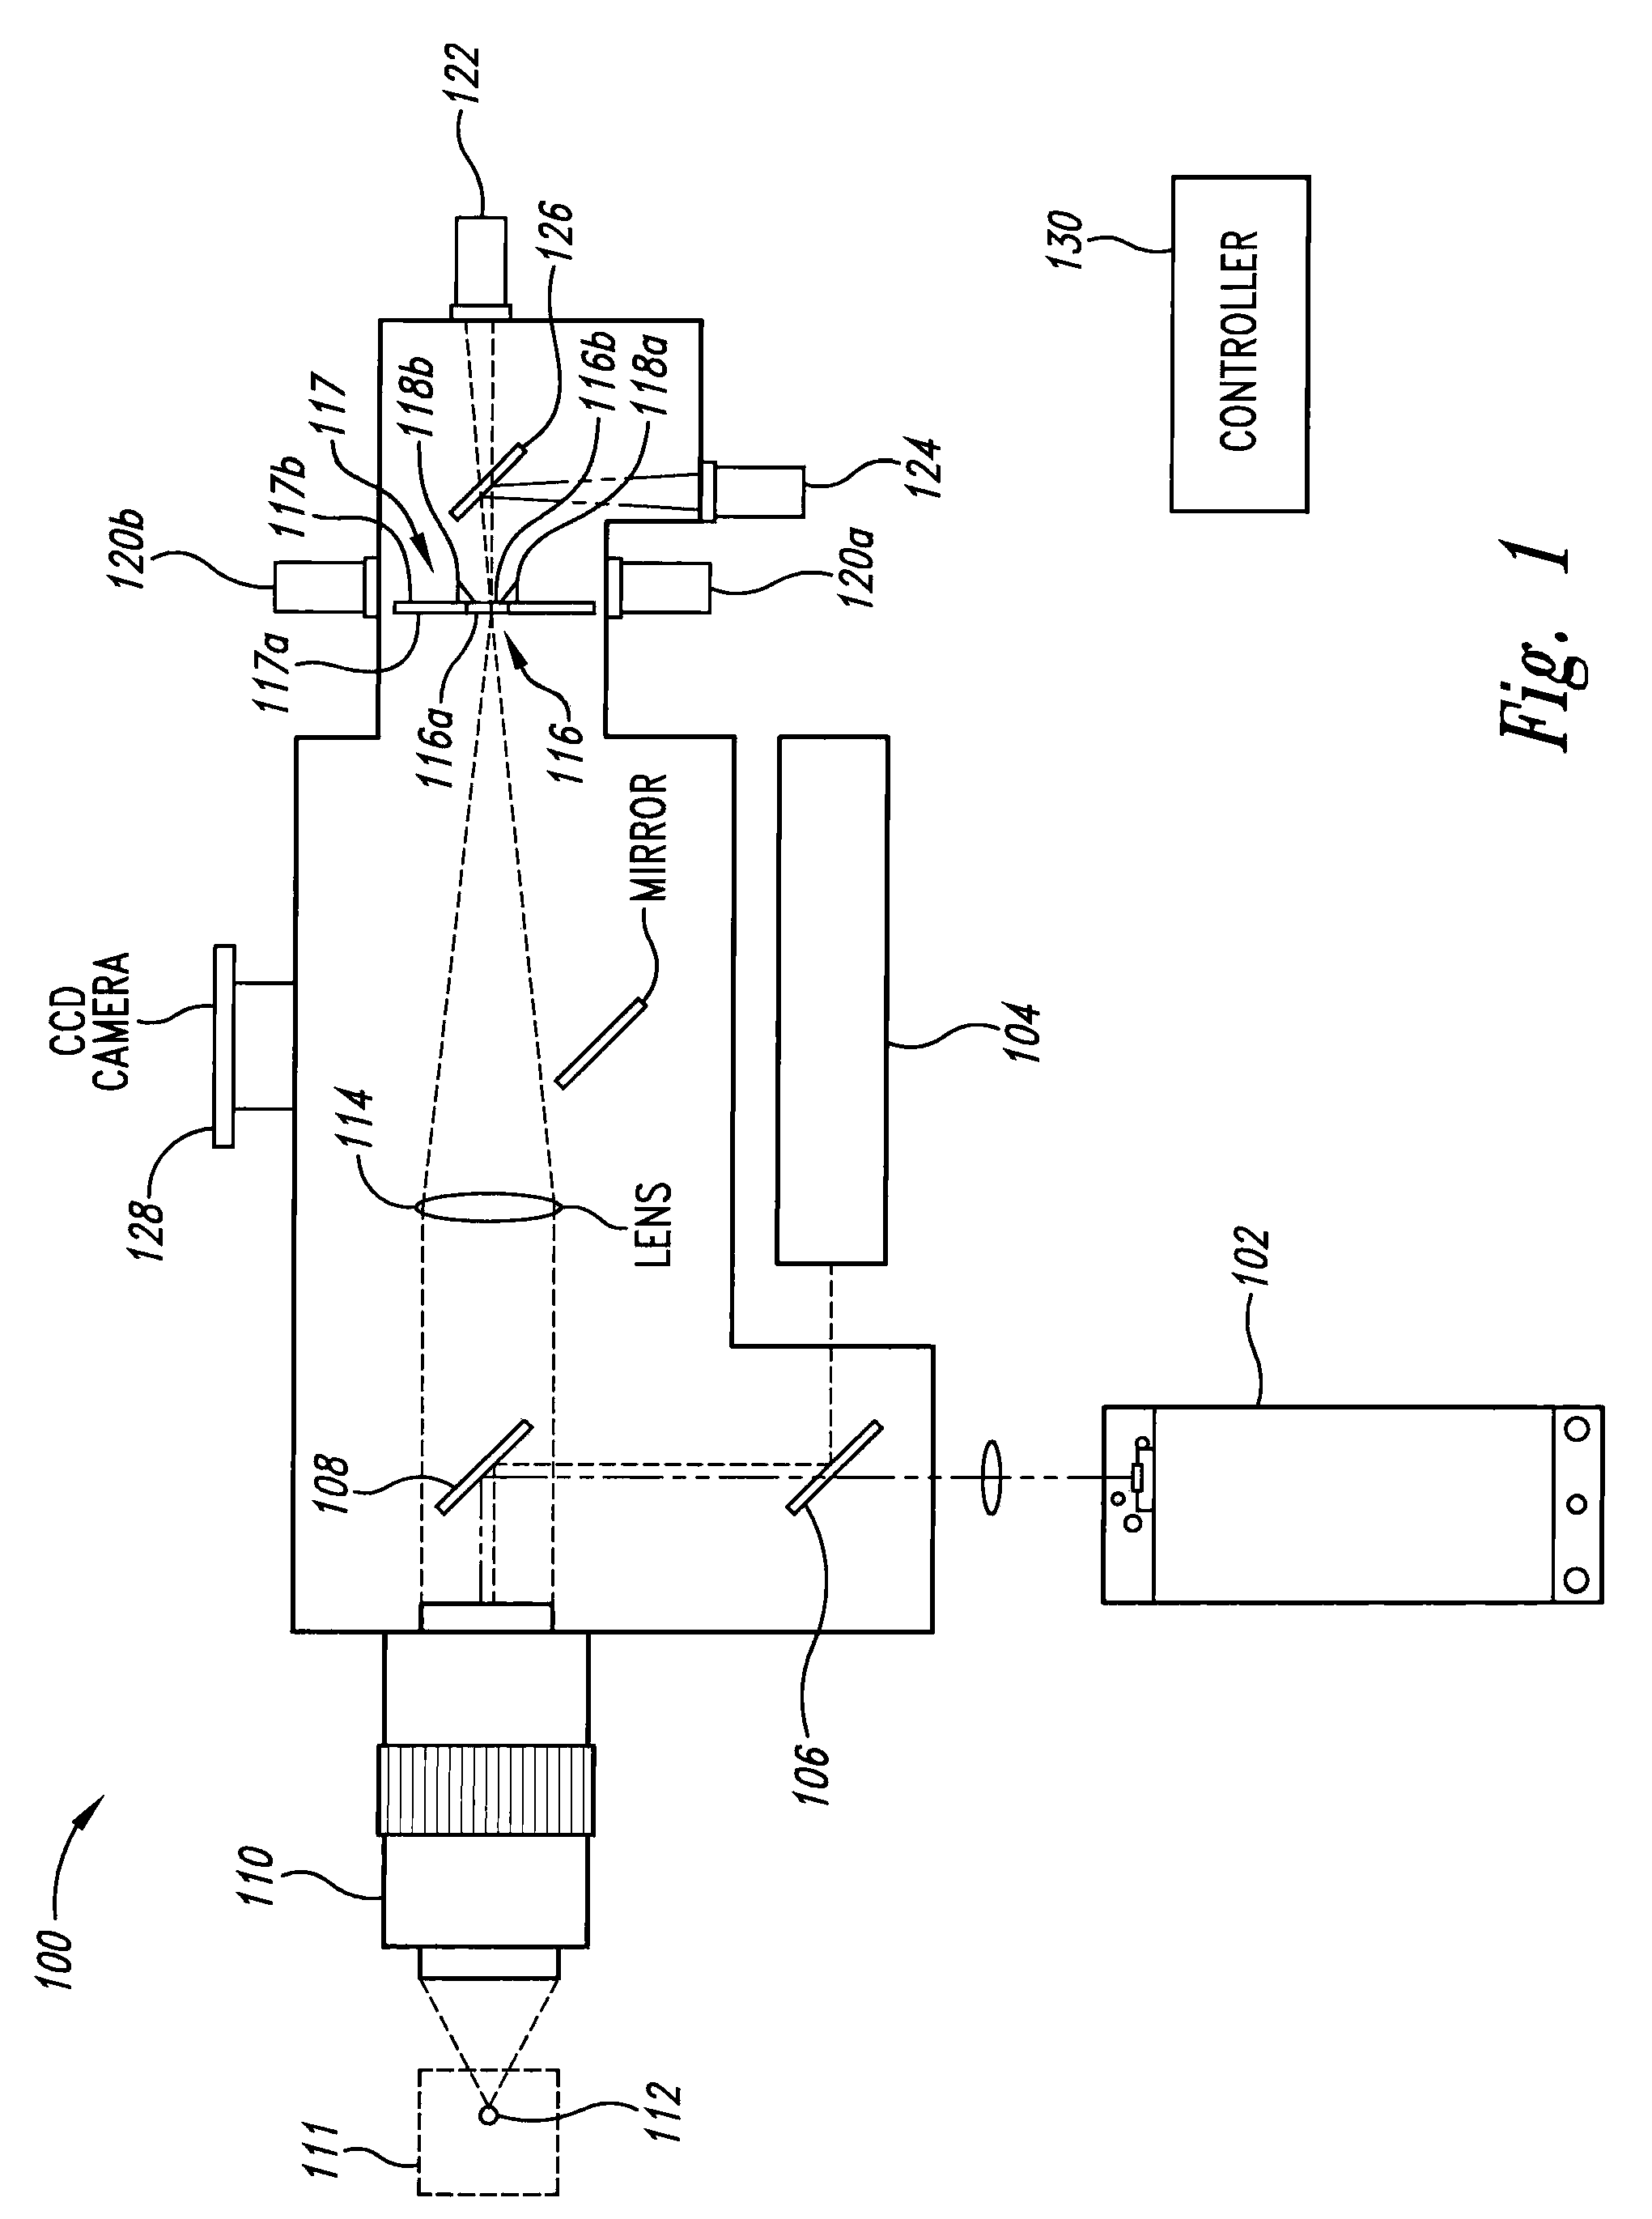 Enhanced detection system and method